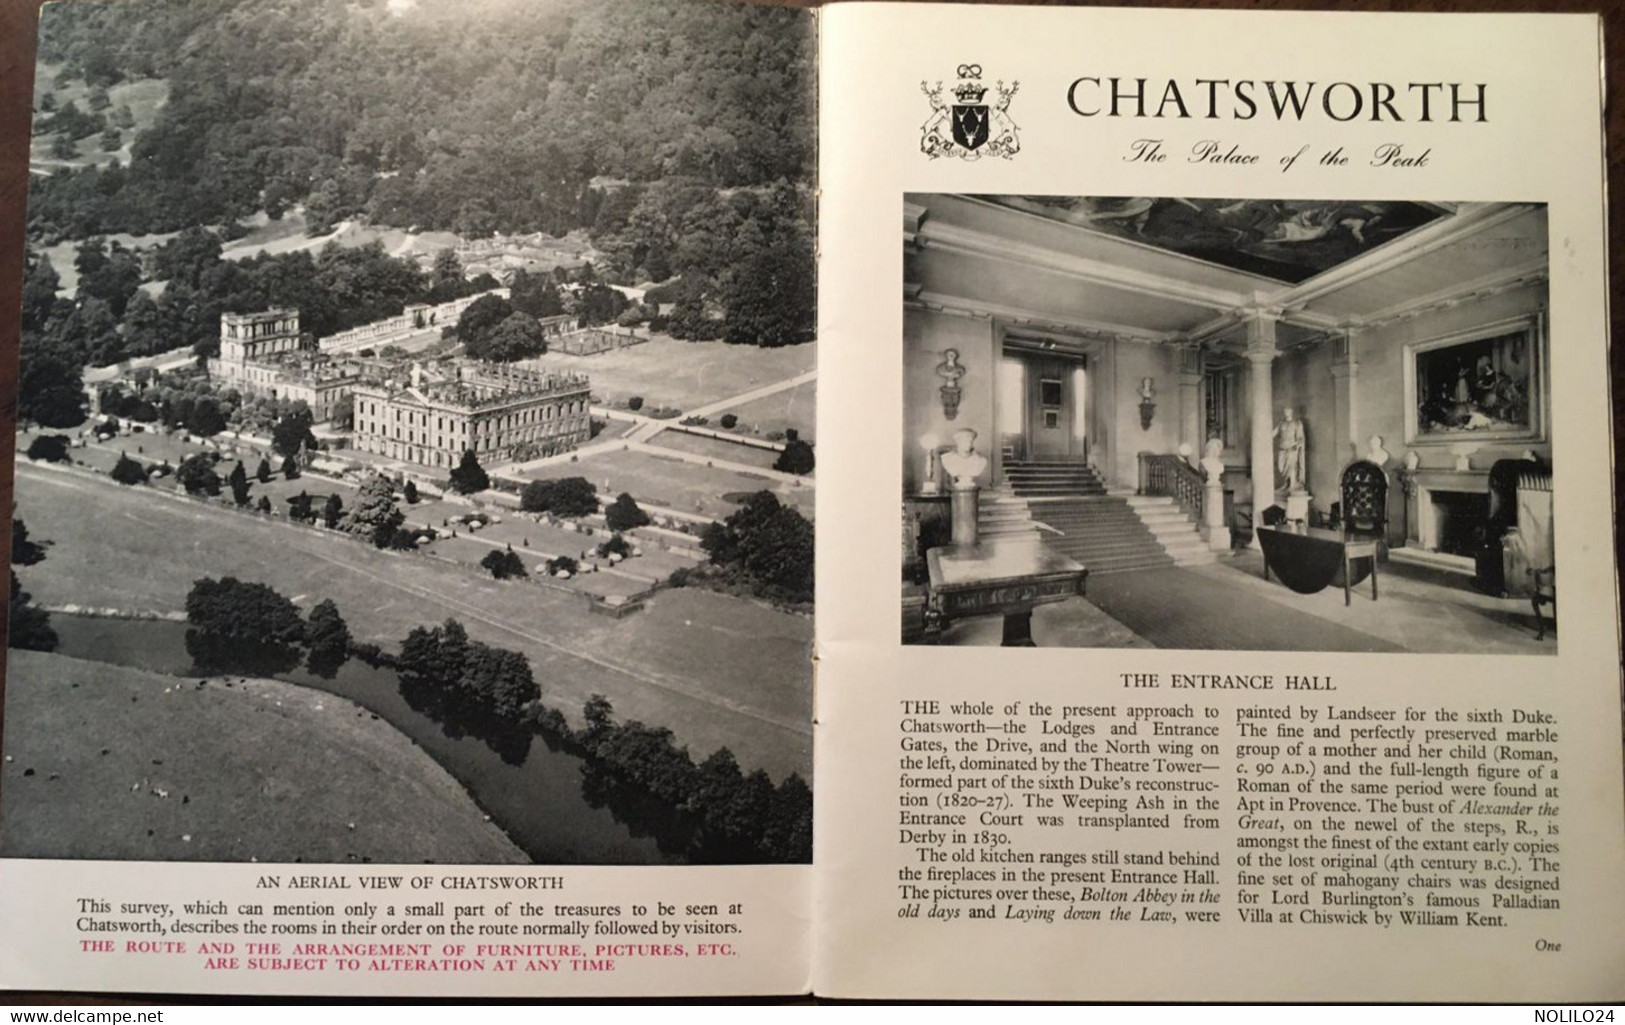 Revue Publication Guide CHATSWORTH The Derbyshire Home Of The Dukes Of DEVONSHIRE - Culture